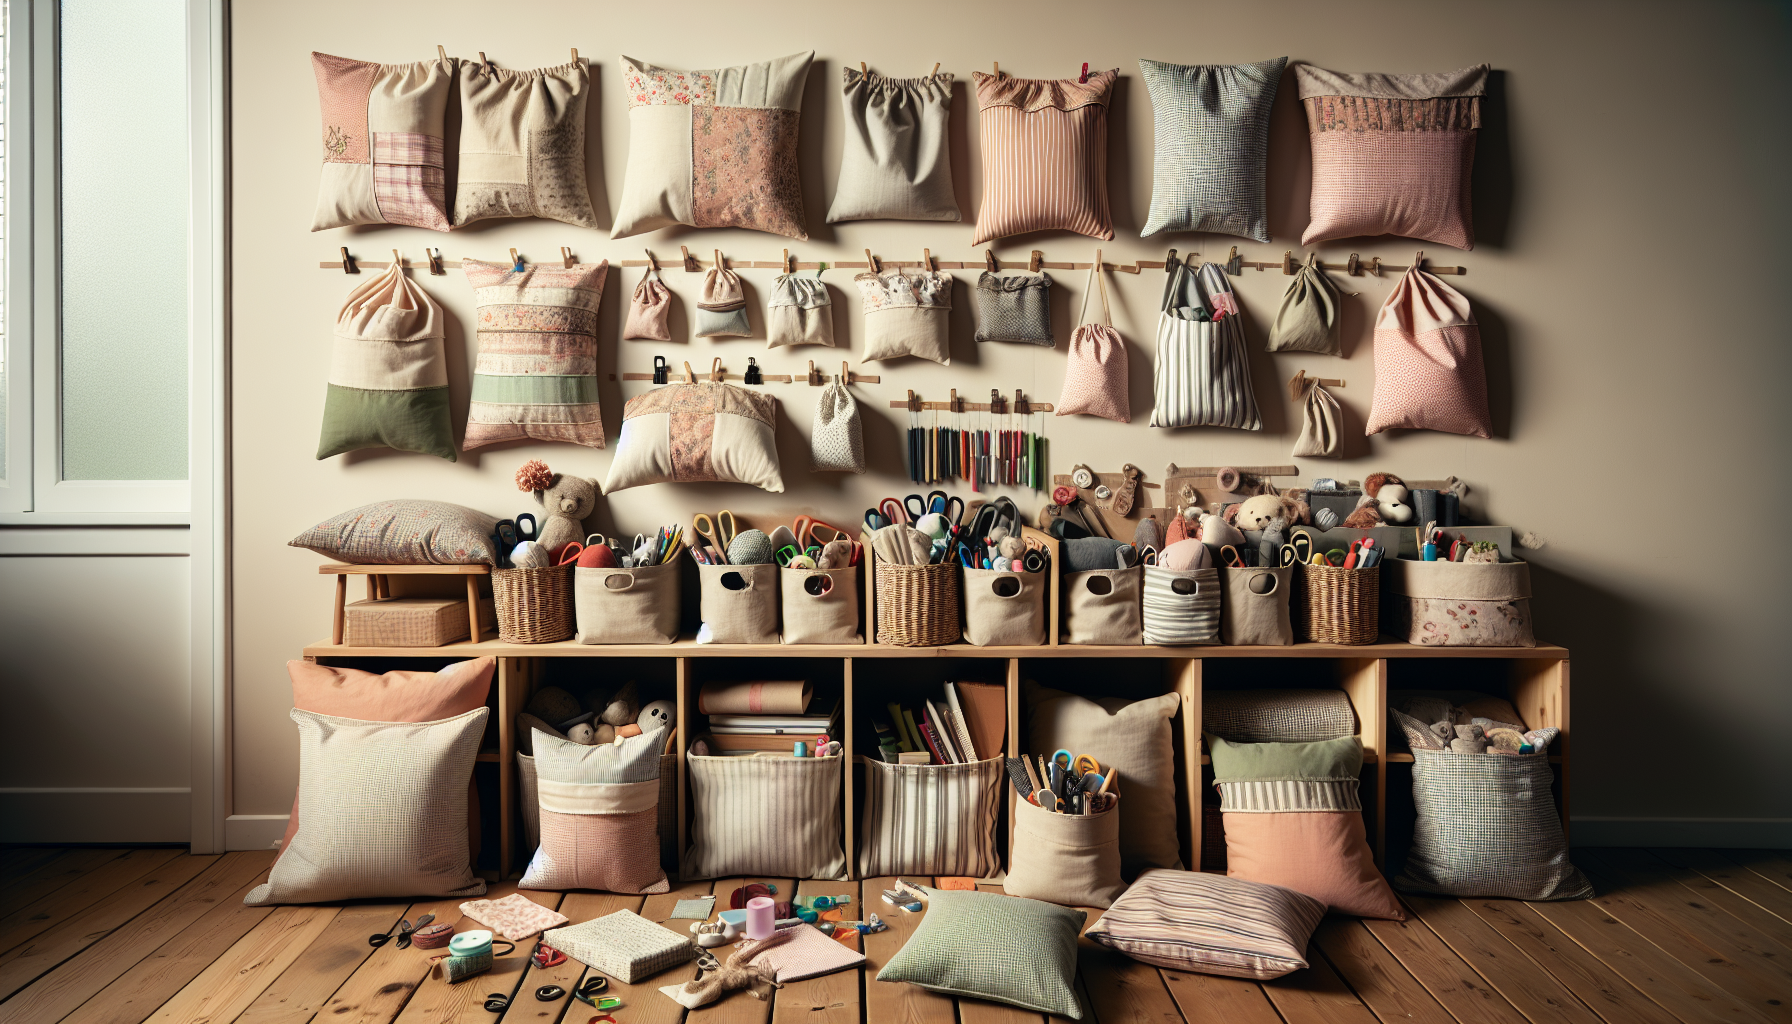 Discover how to repurpose pillowcases for sustainable home organization